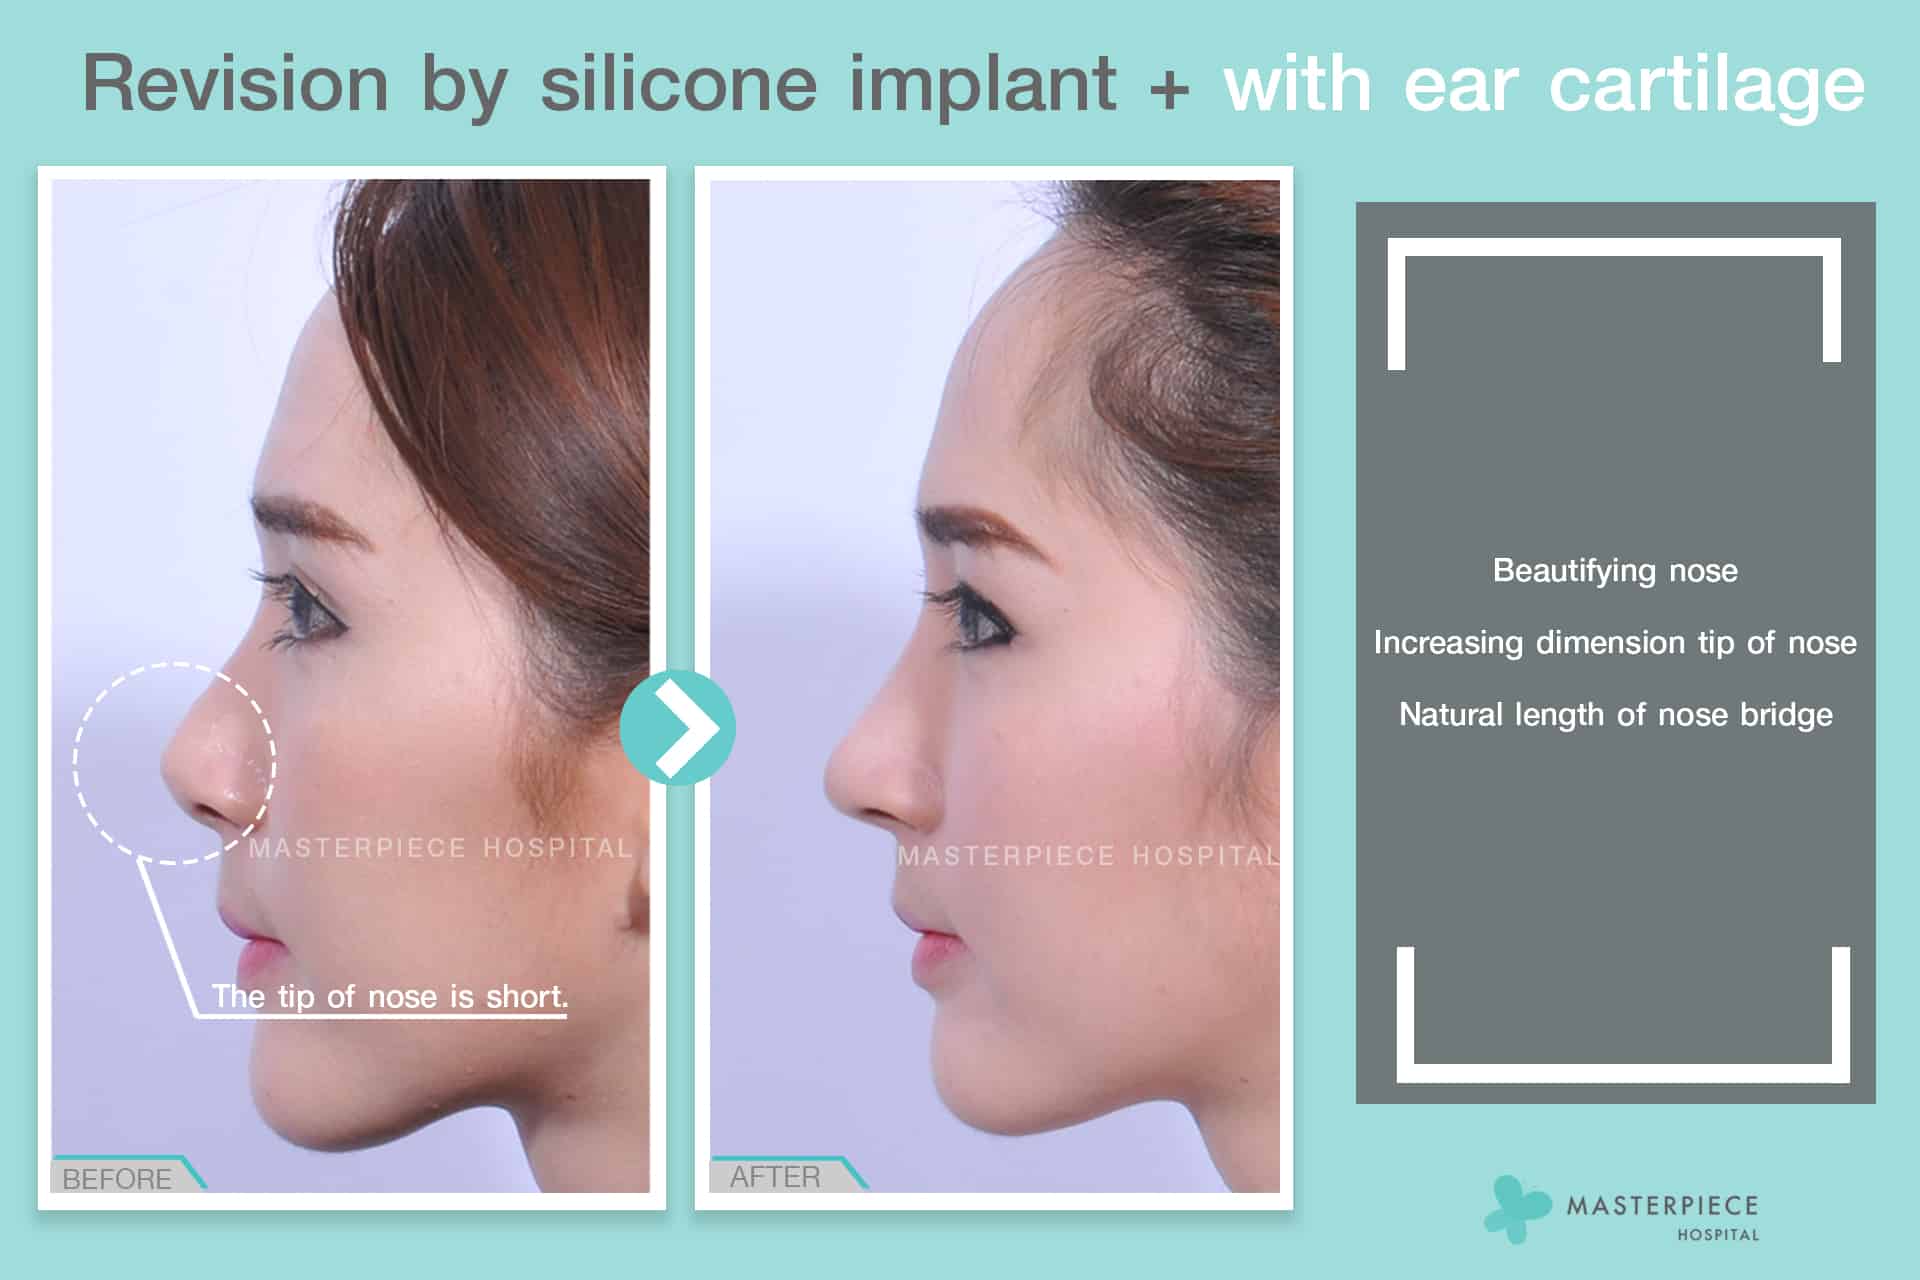 Revision by silicone implant with ear cartilage